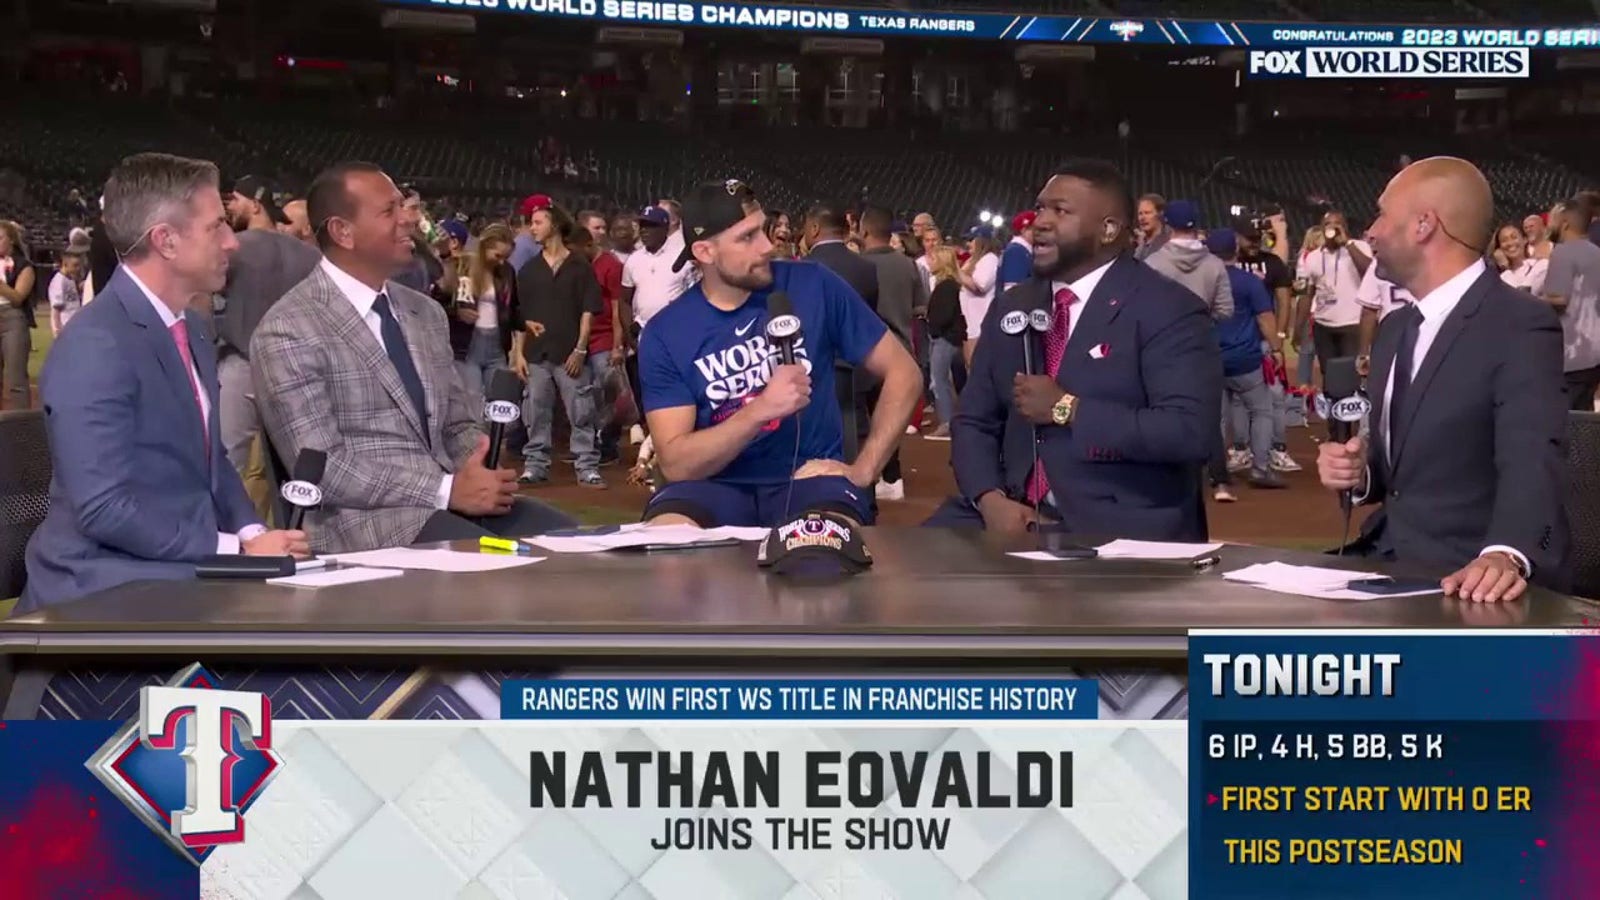 "I want to be one of the best" — Nathan Eovaldi 